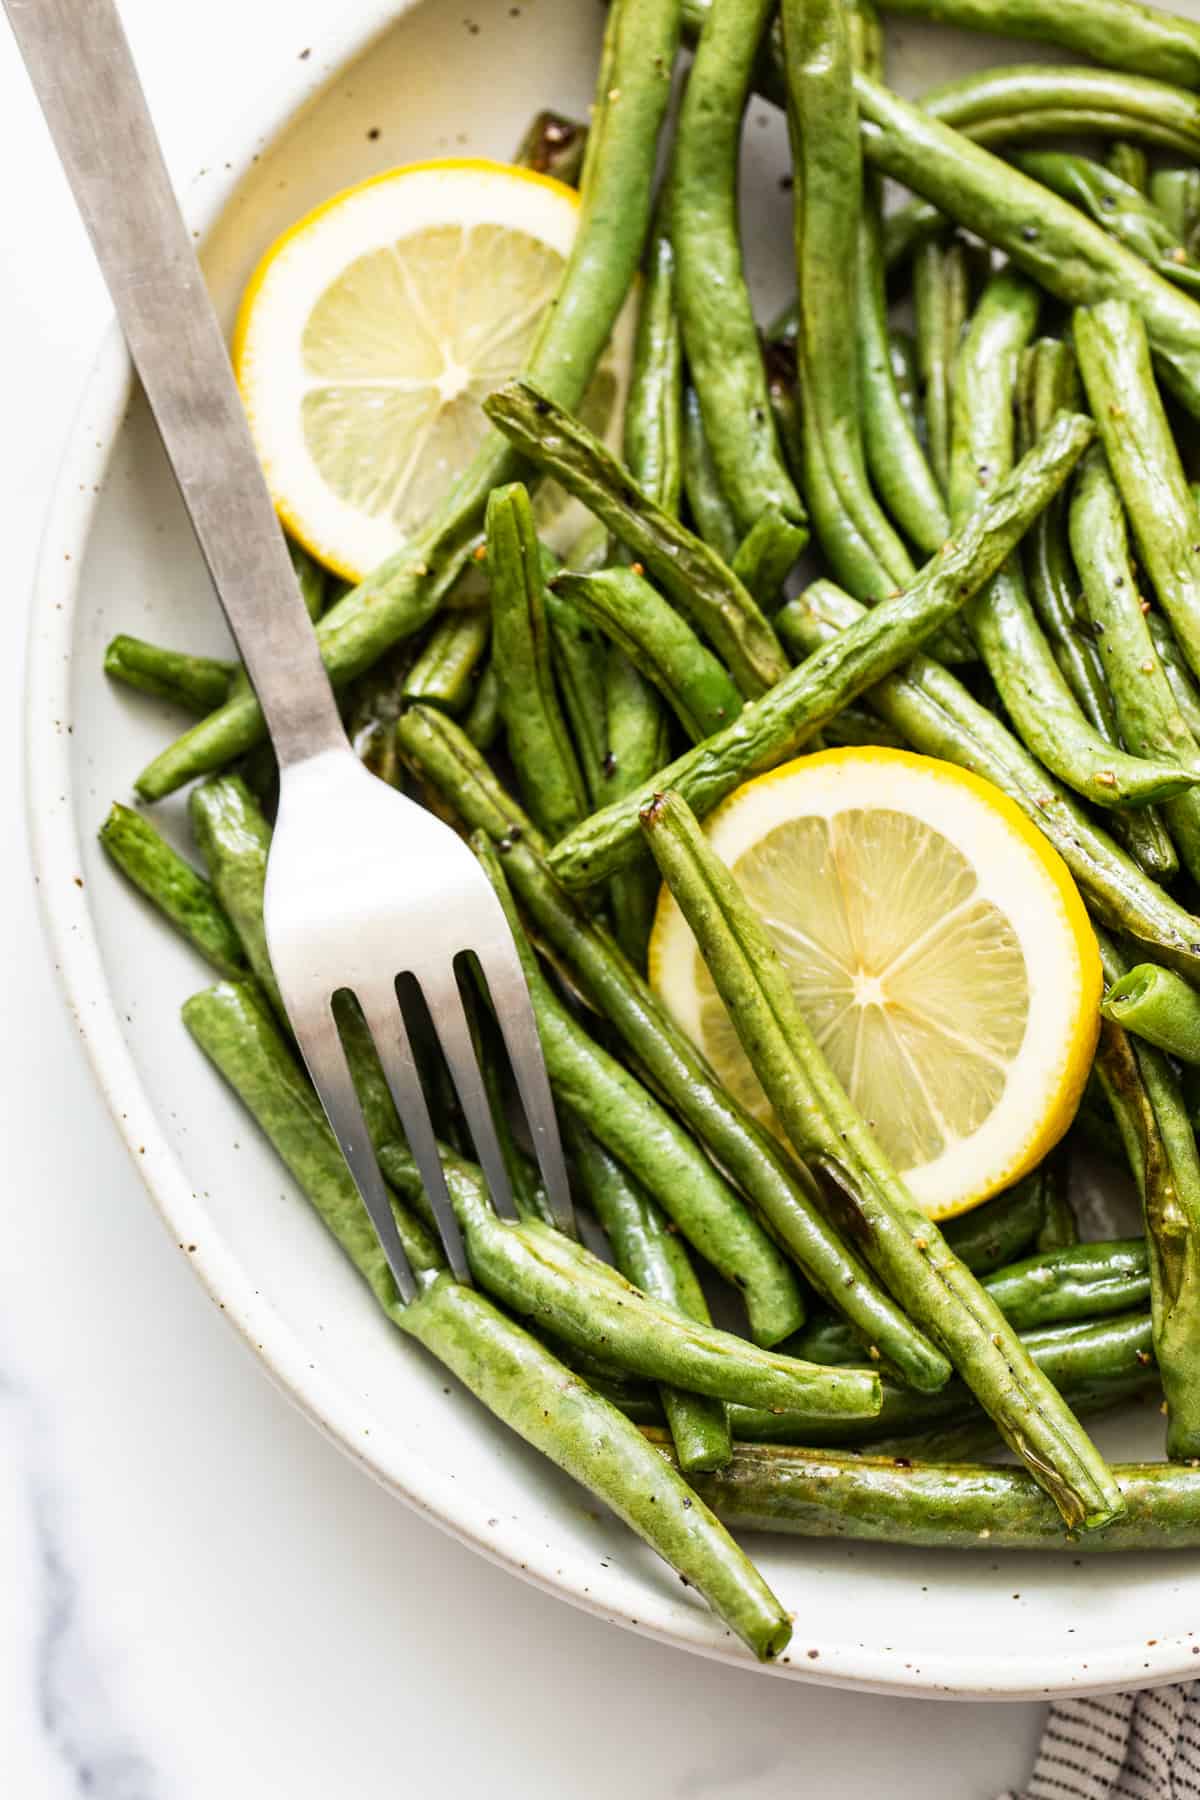 Green beans in a serving dish TeamJiX